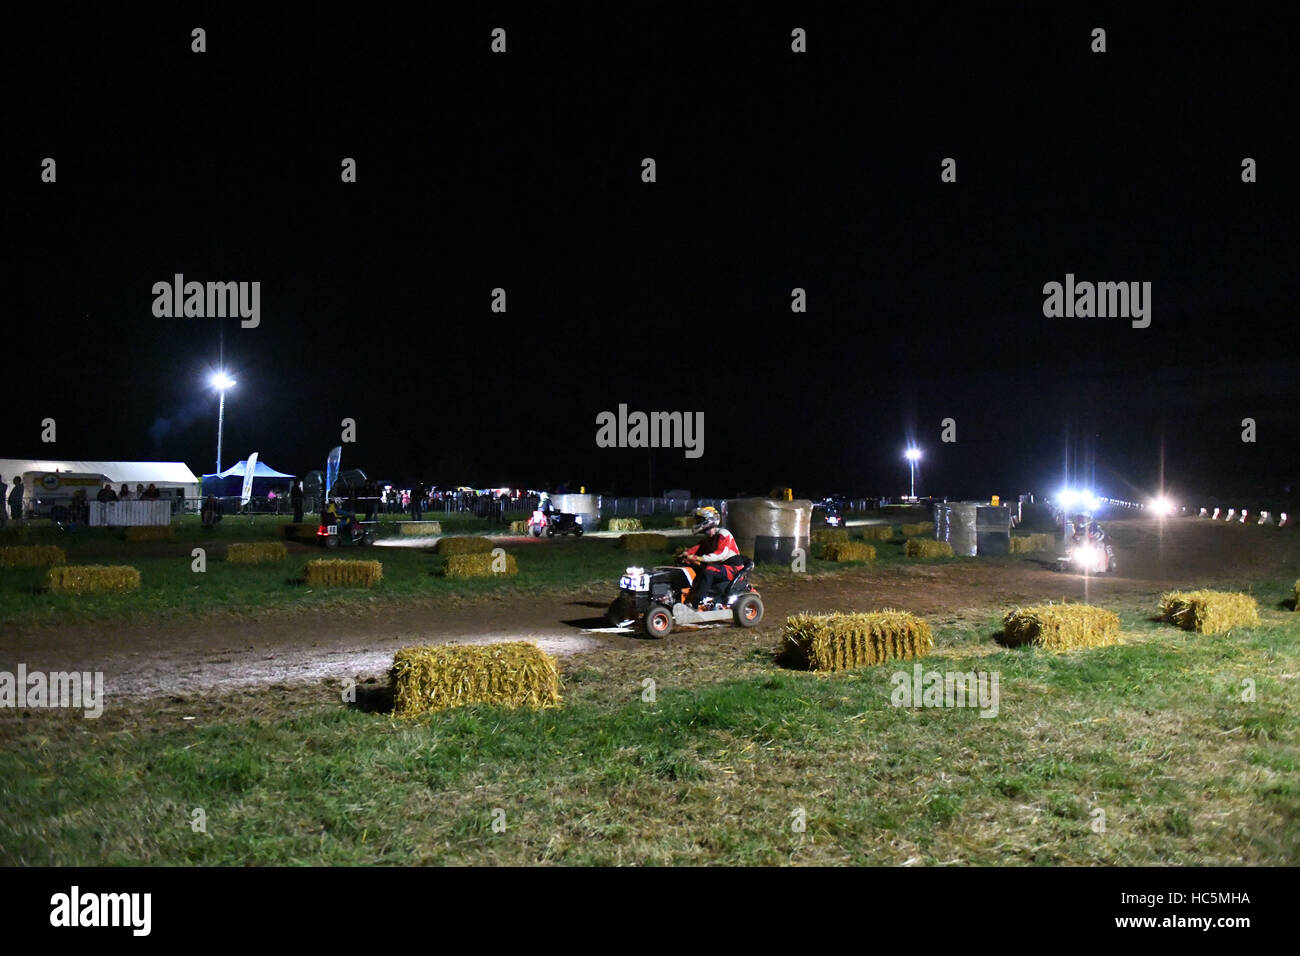 The British Lawn Mower Racing Association 12 Hour lawn mower race in Five Oaks, near Billingshurst in West Sussex, UK.  The race started at 8pm going through the night non-stop until 8am with 63 teams taking part in the 12 hour endurance race.  Featuring: Stock Photo